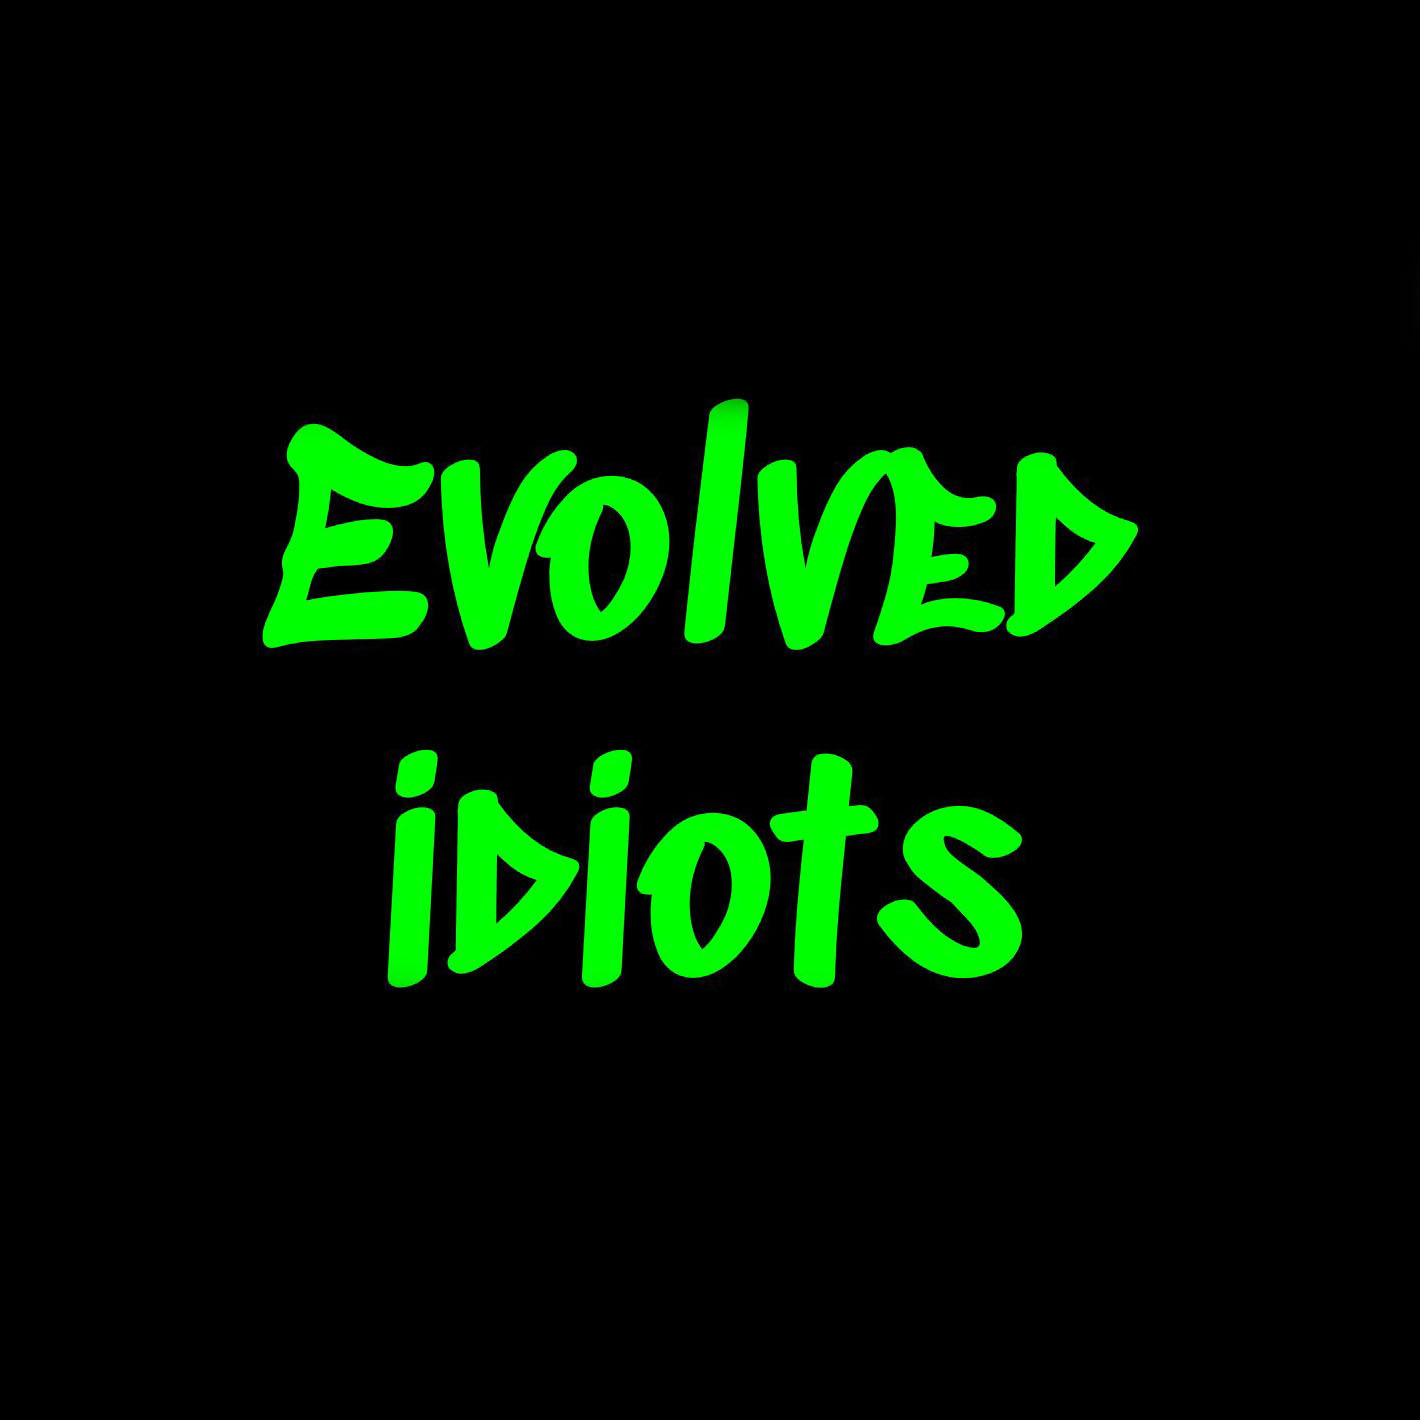 Show artwork for Evolved idiots